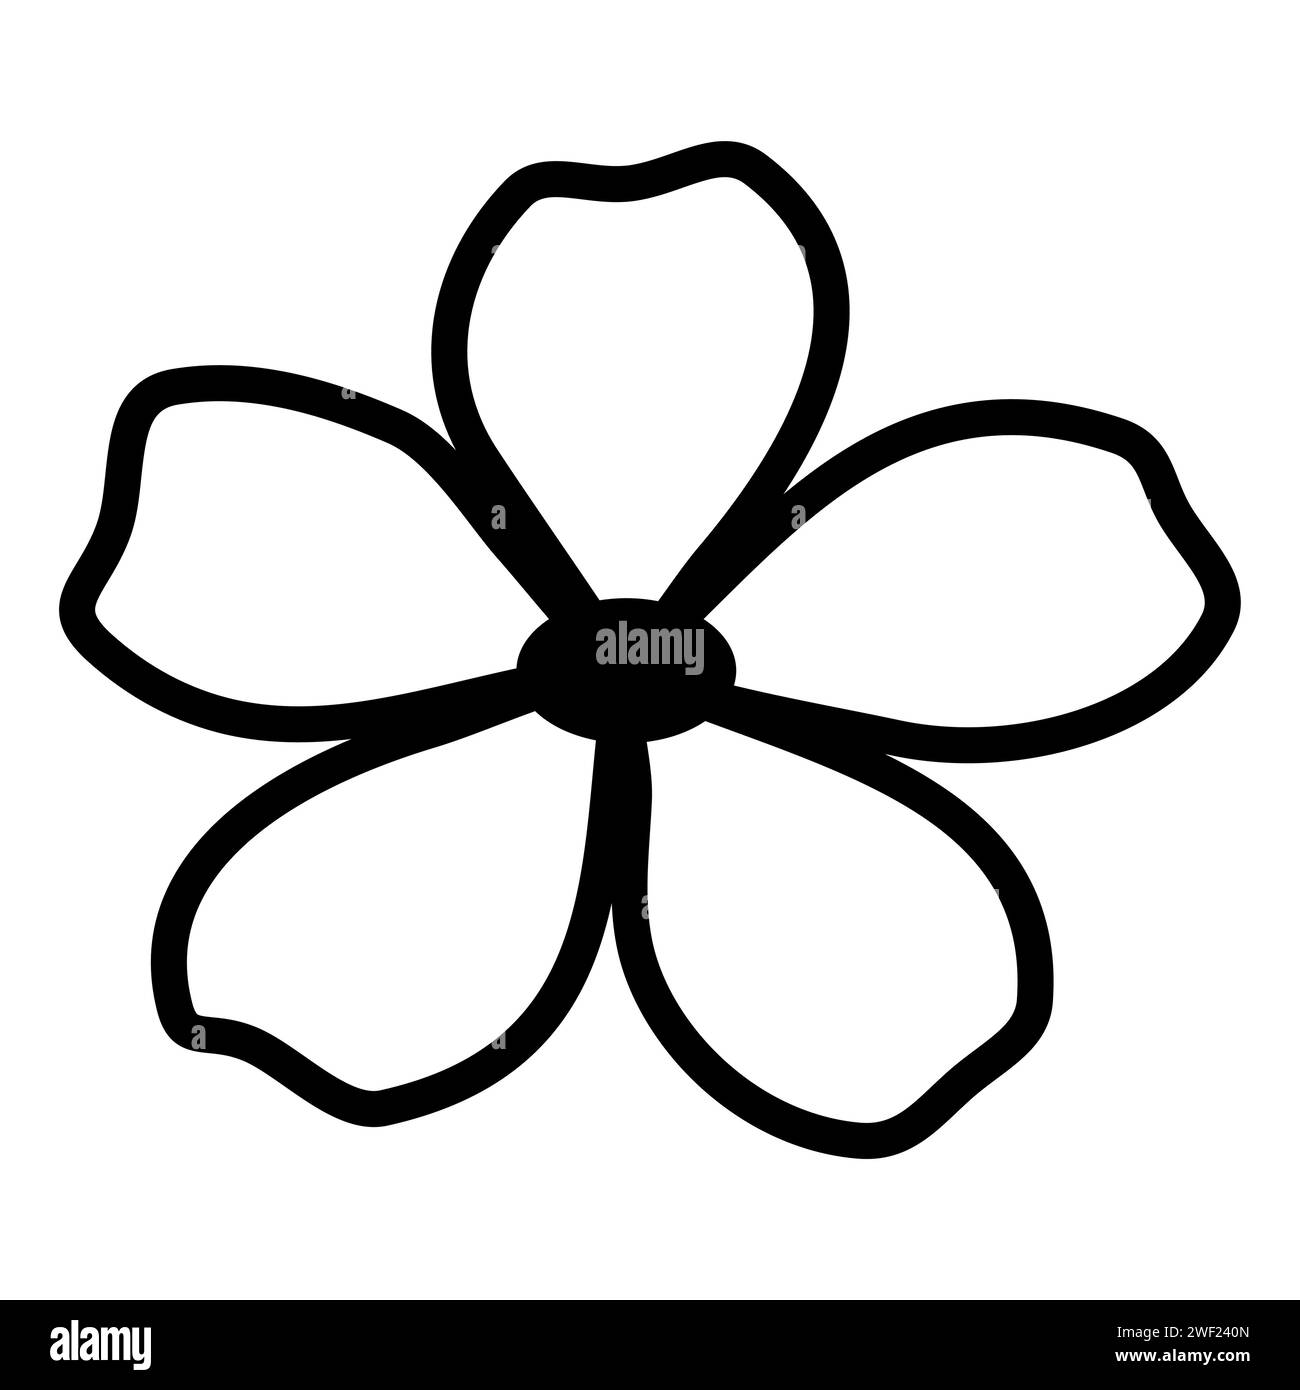 Decorative flower Outline abstract flower head Black contour Vector illustration Isolated on white background Stock Vector